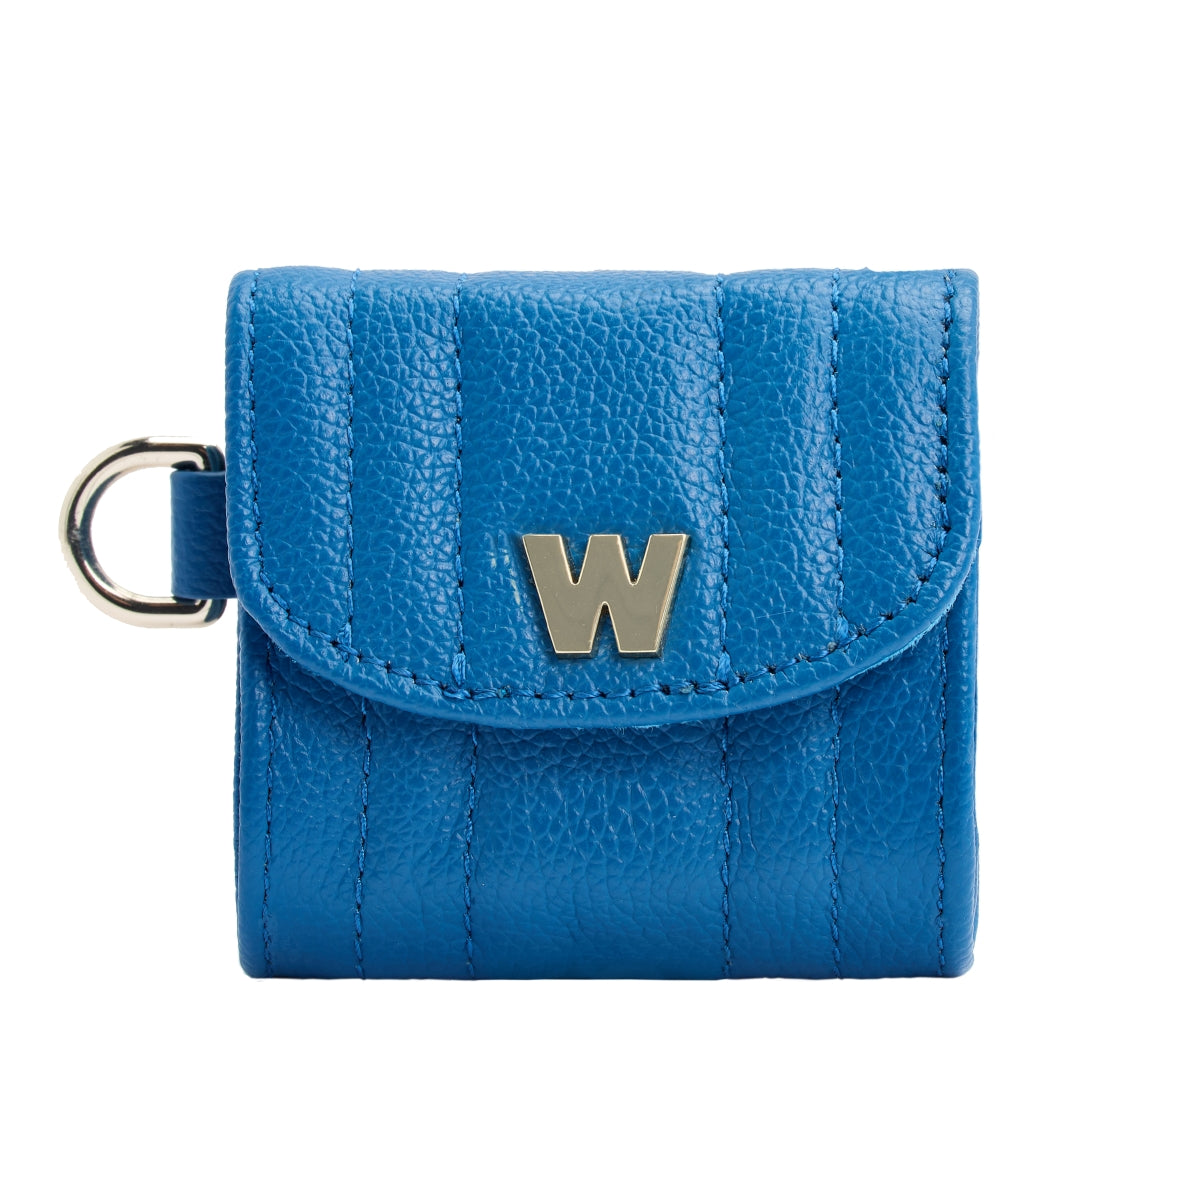 Wolf Mimi Collection Leather Blue Earpods Case with Wristlet - Blue